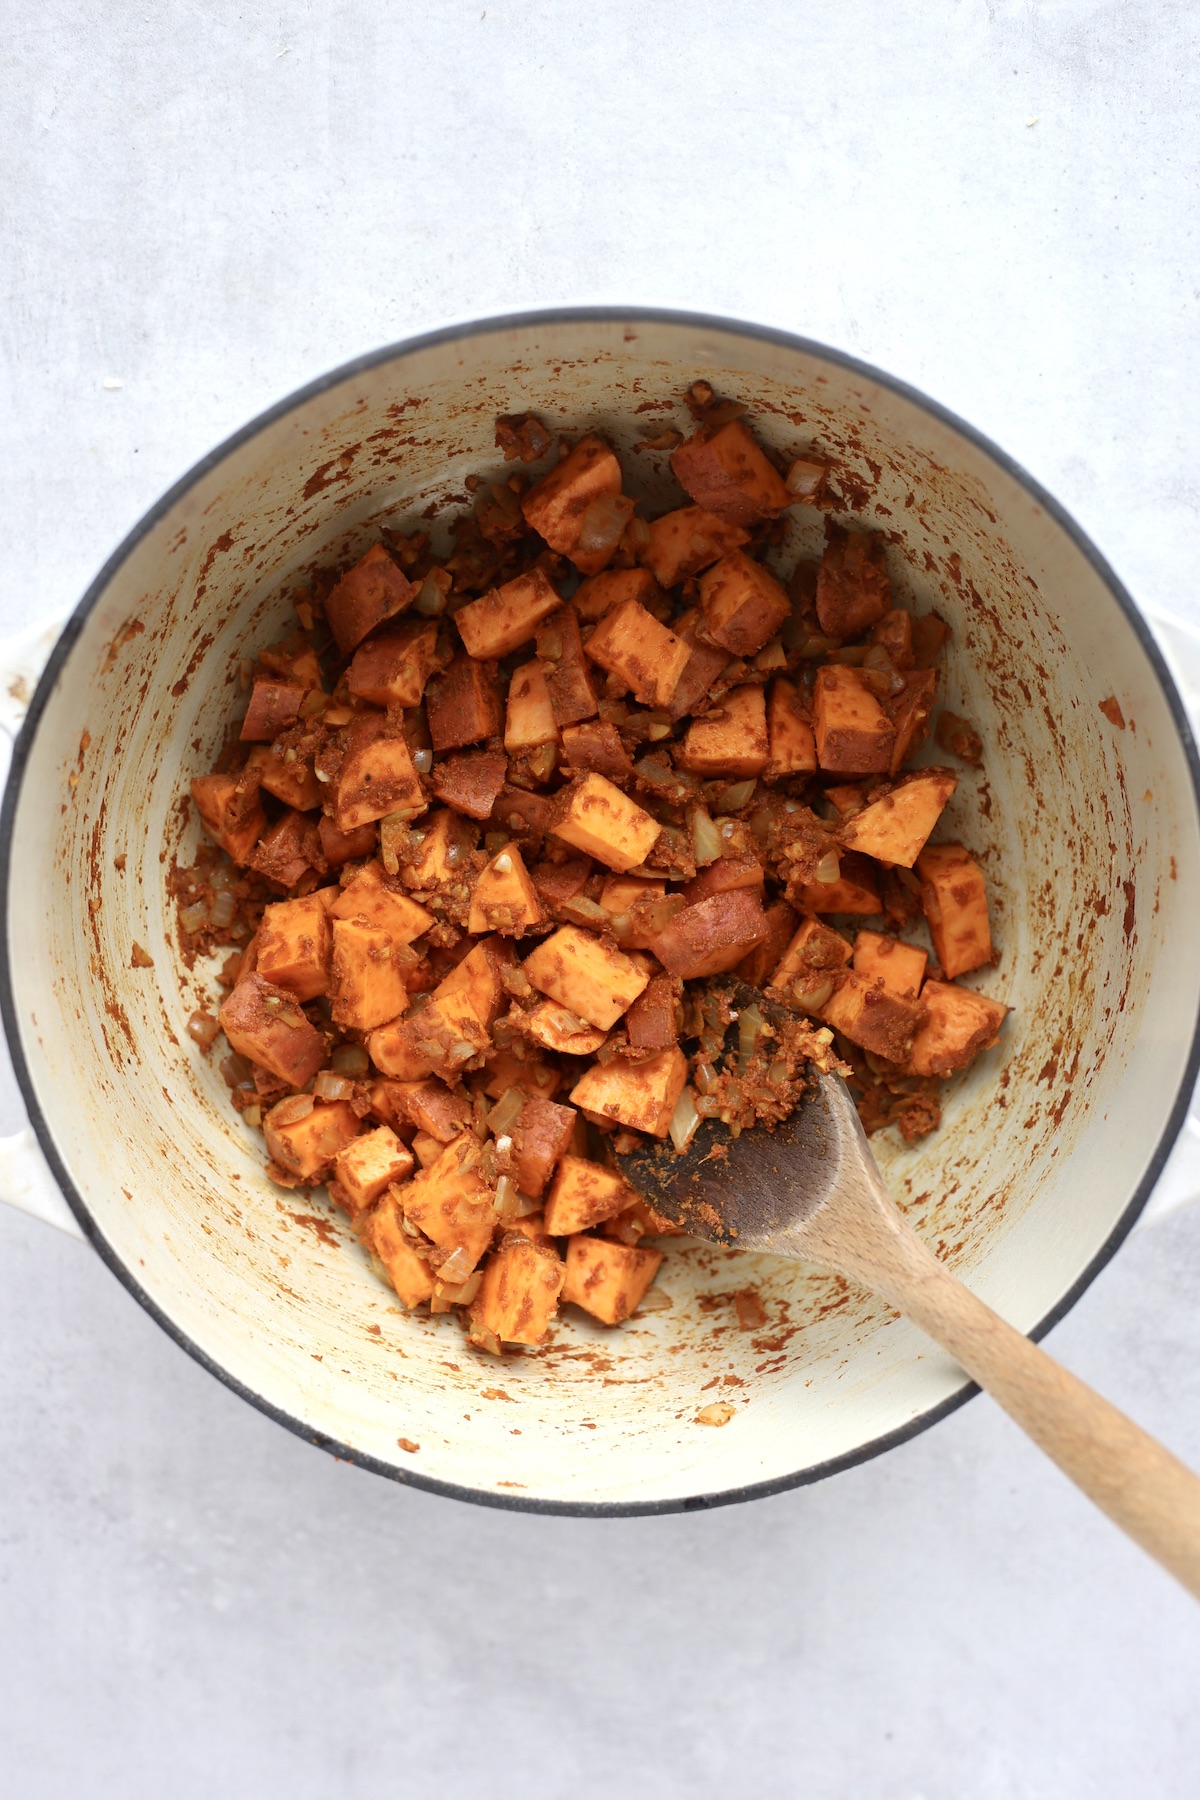 Chopped sweet potatoes coated in a red and brown spice mixture in a large white pot being stirred with a wooden spoon.